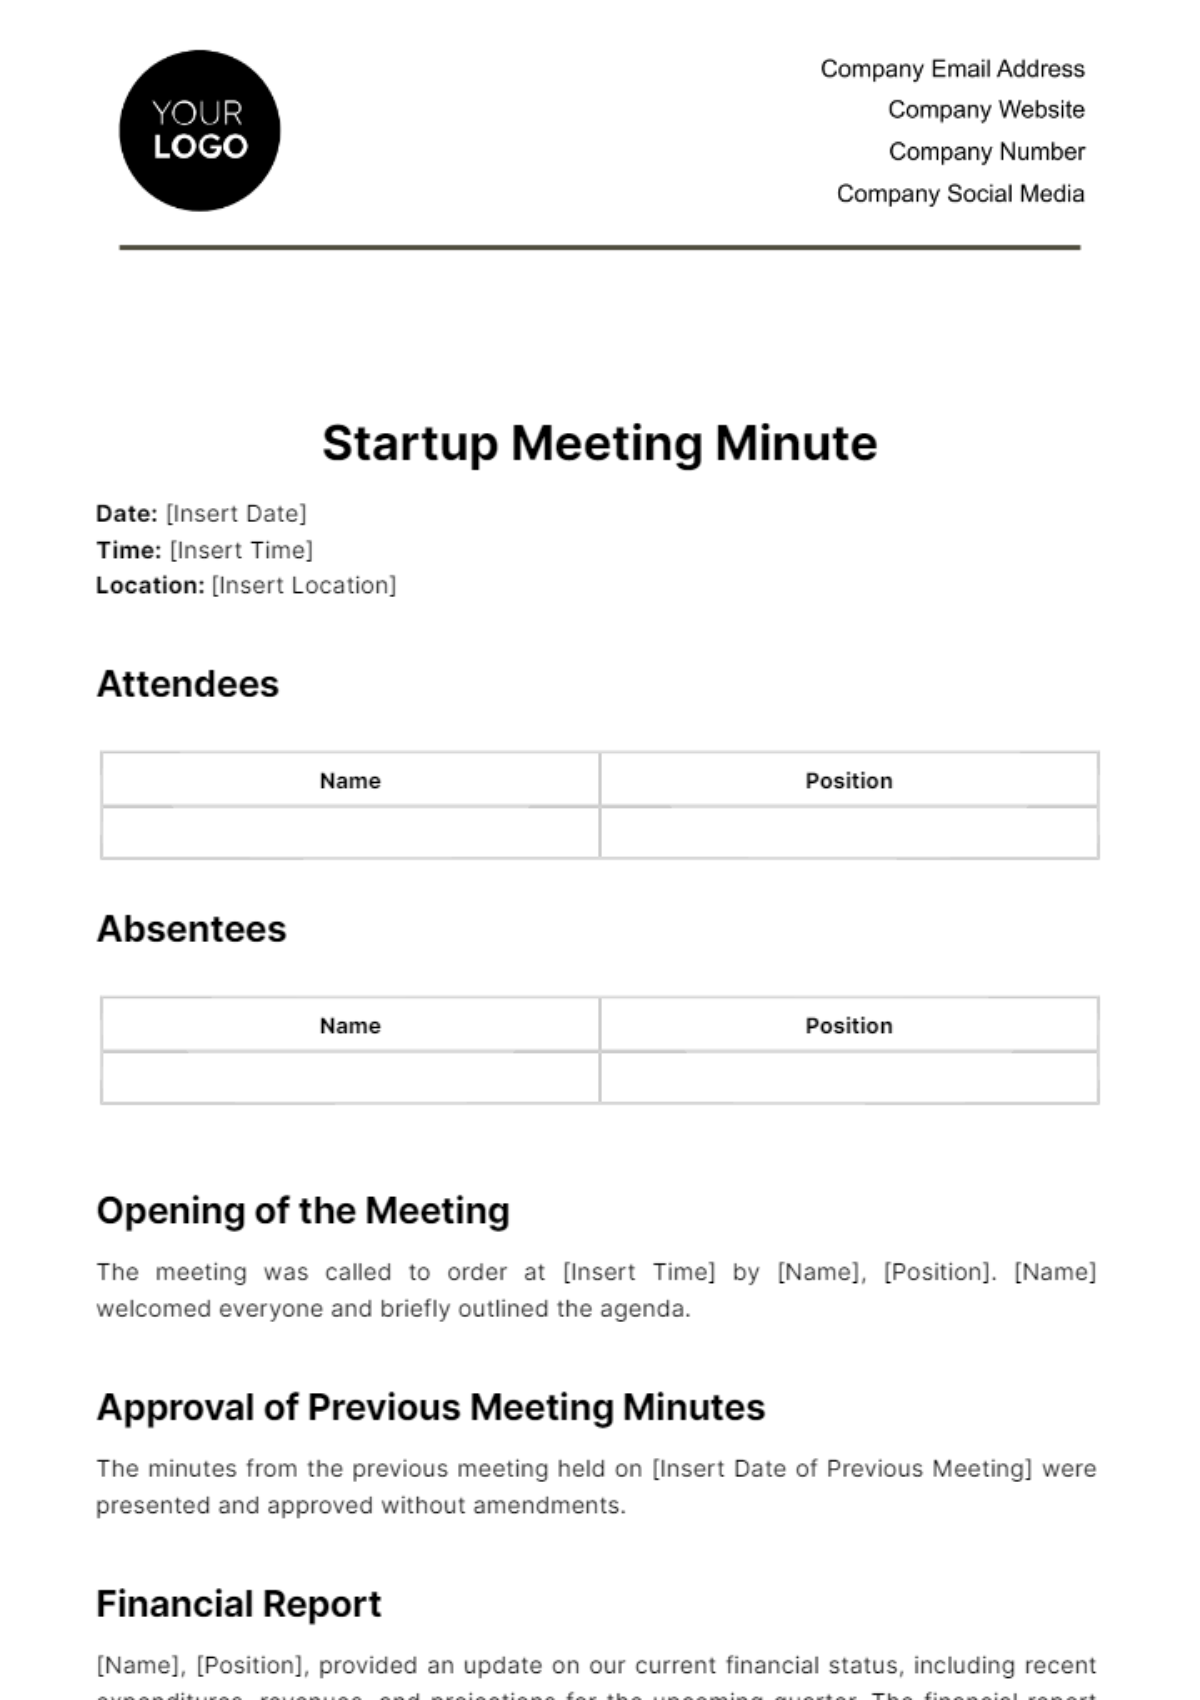 Startup Meeting Minute Template